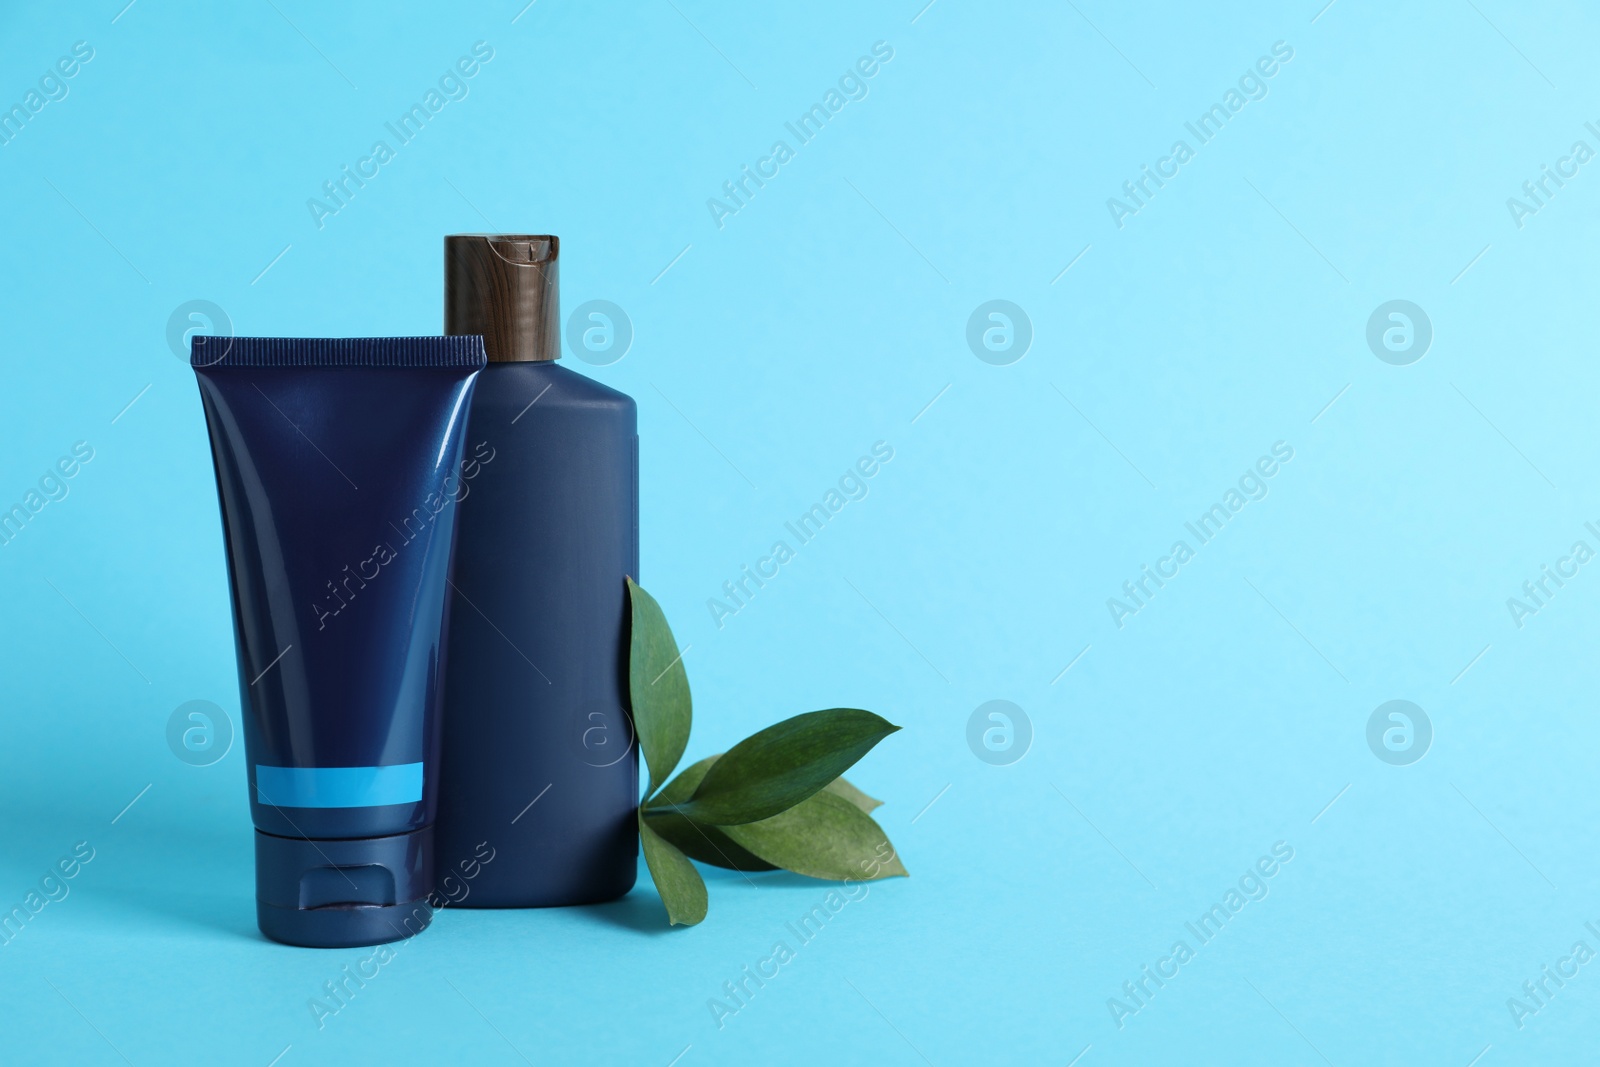 Photo of Men's facial cream, shampoo and green leaves on turquoise background. Mockup for design